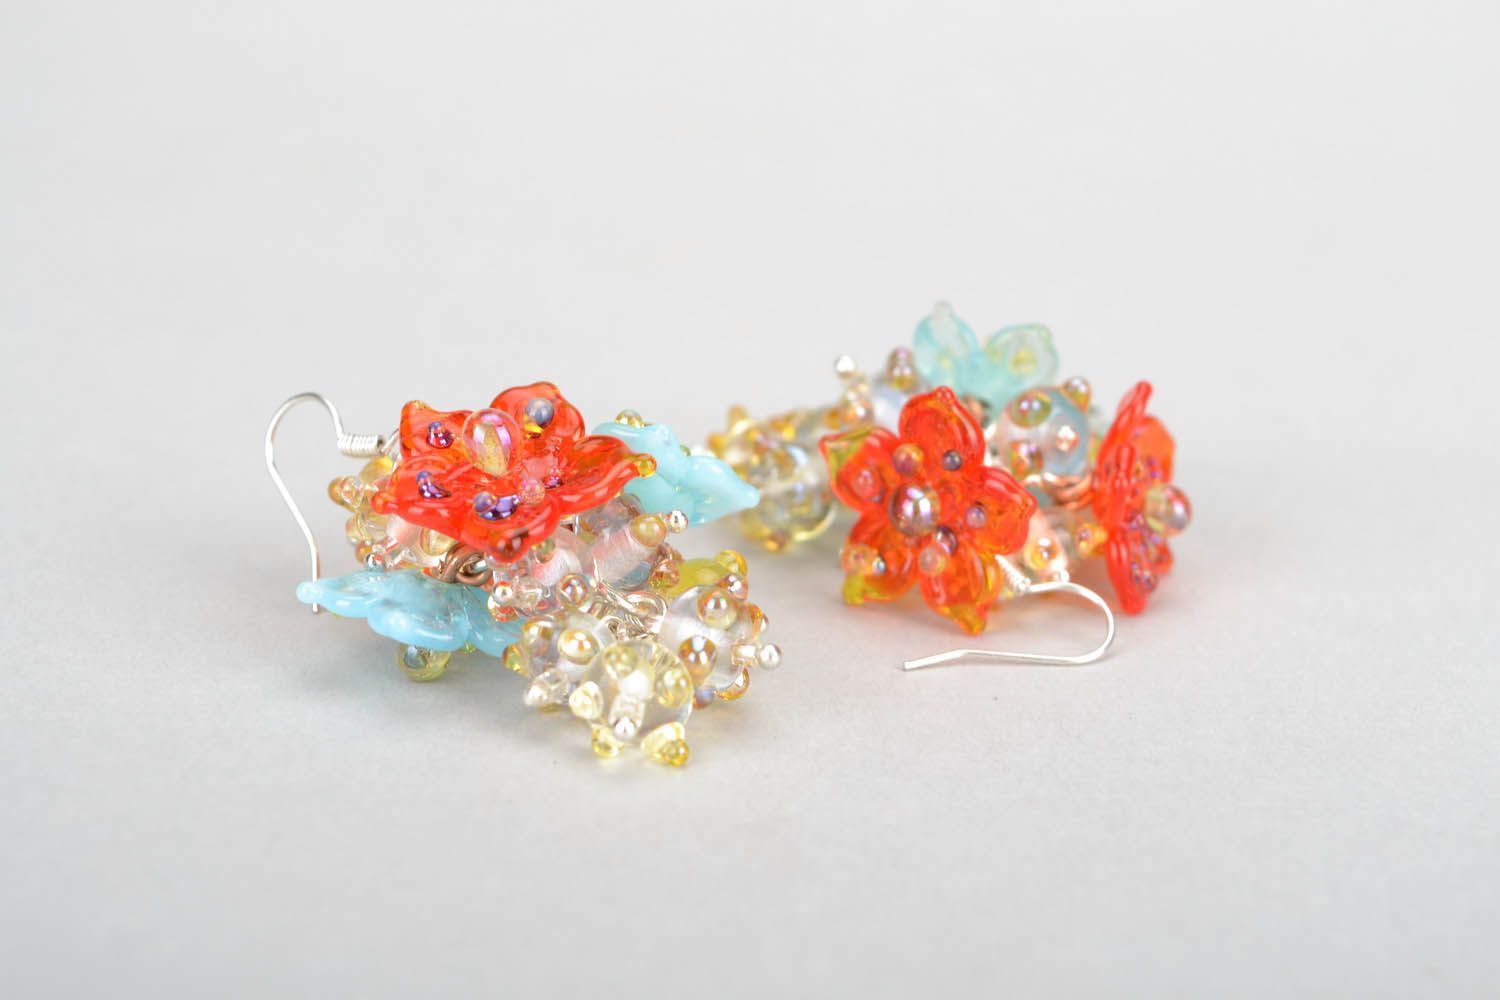 Floral earrings made of glass photo 5